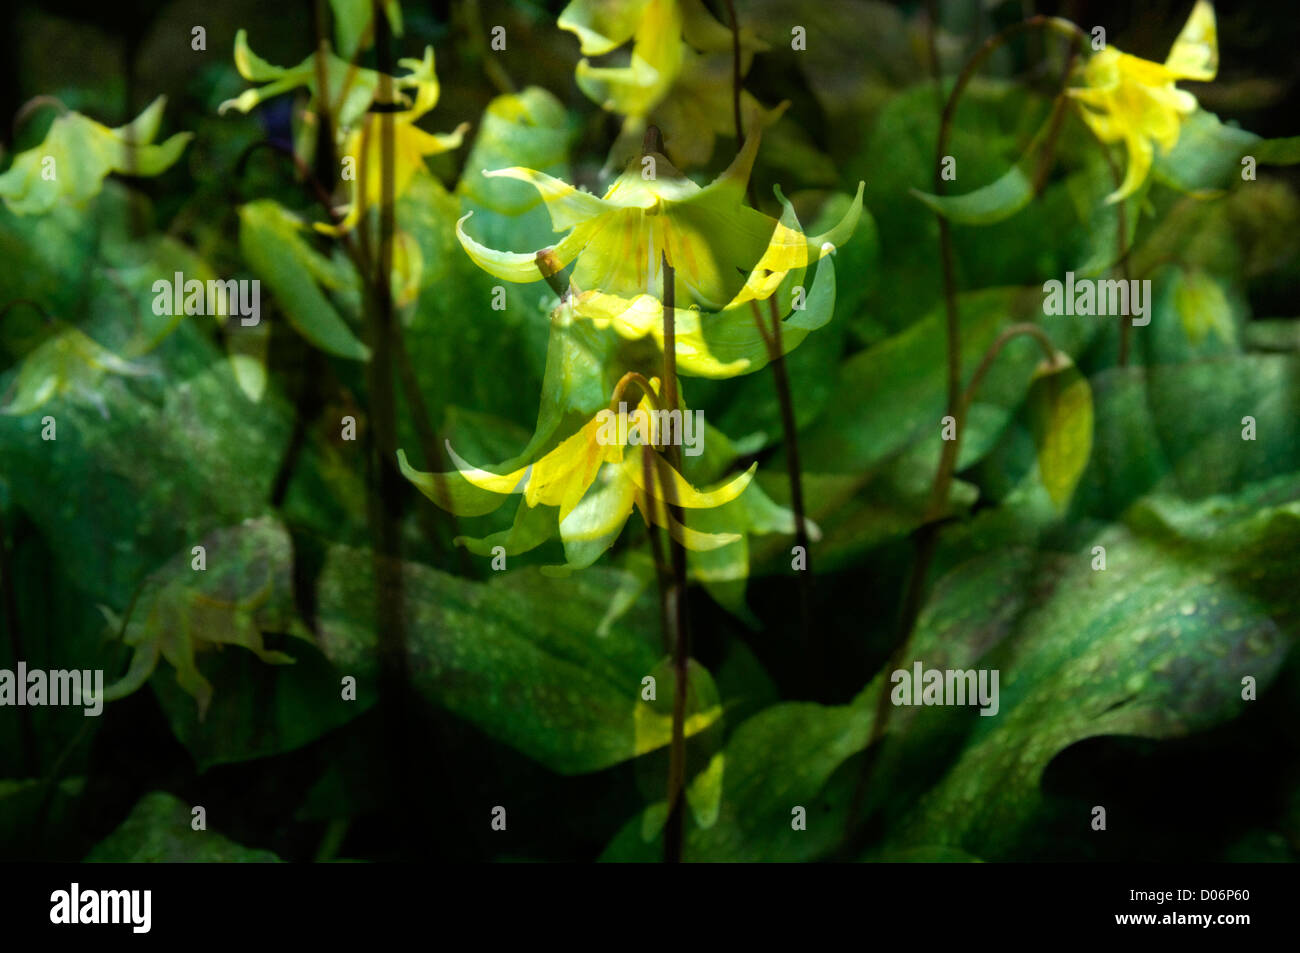 Yellow Dog's Tooth Violet flowers in a composite montage image Stock Photo